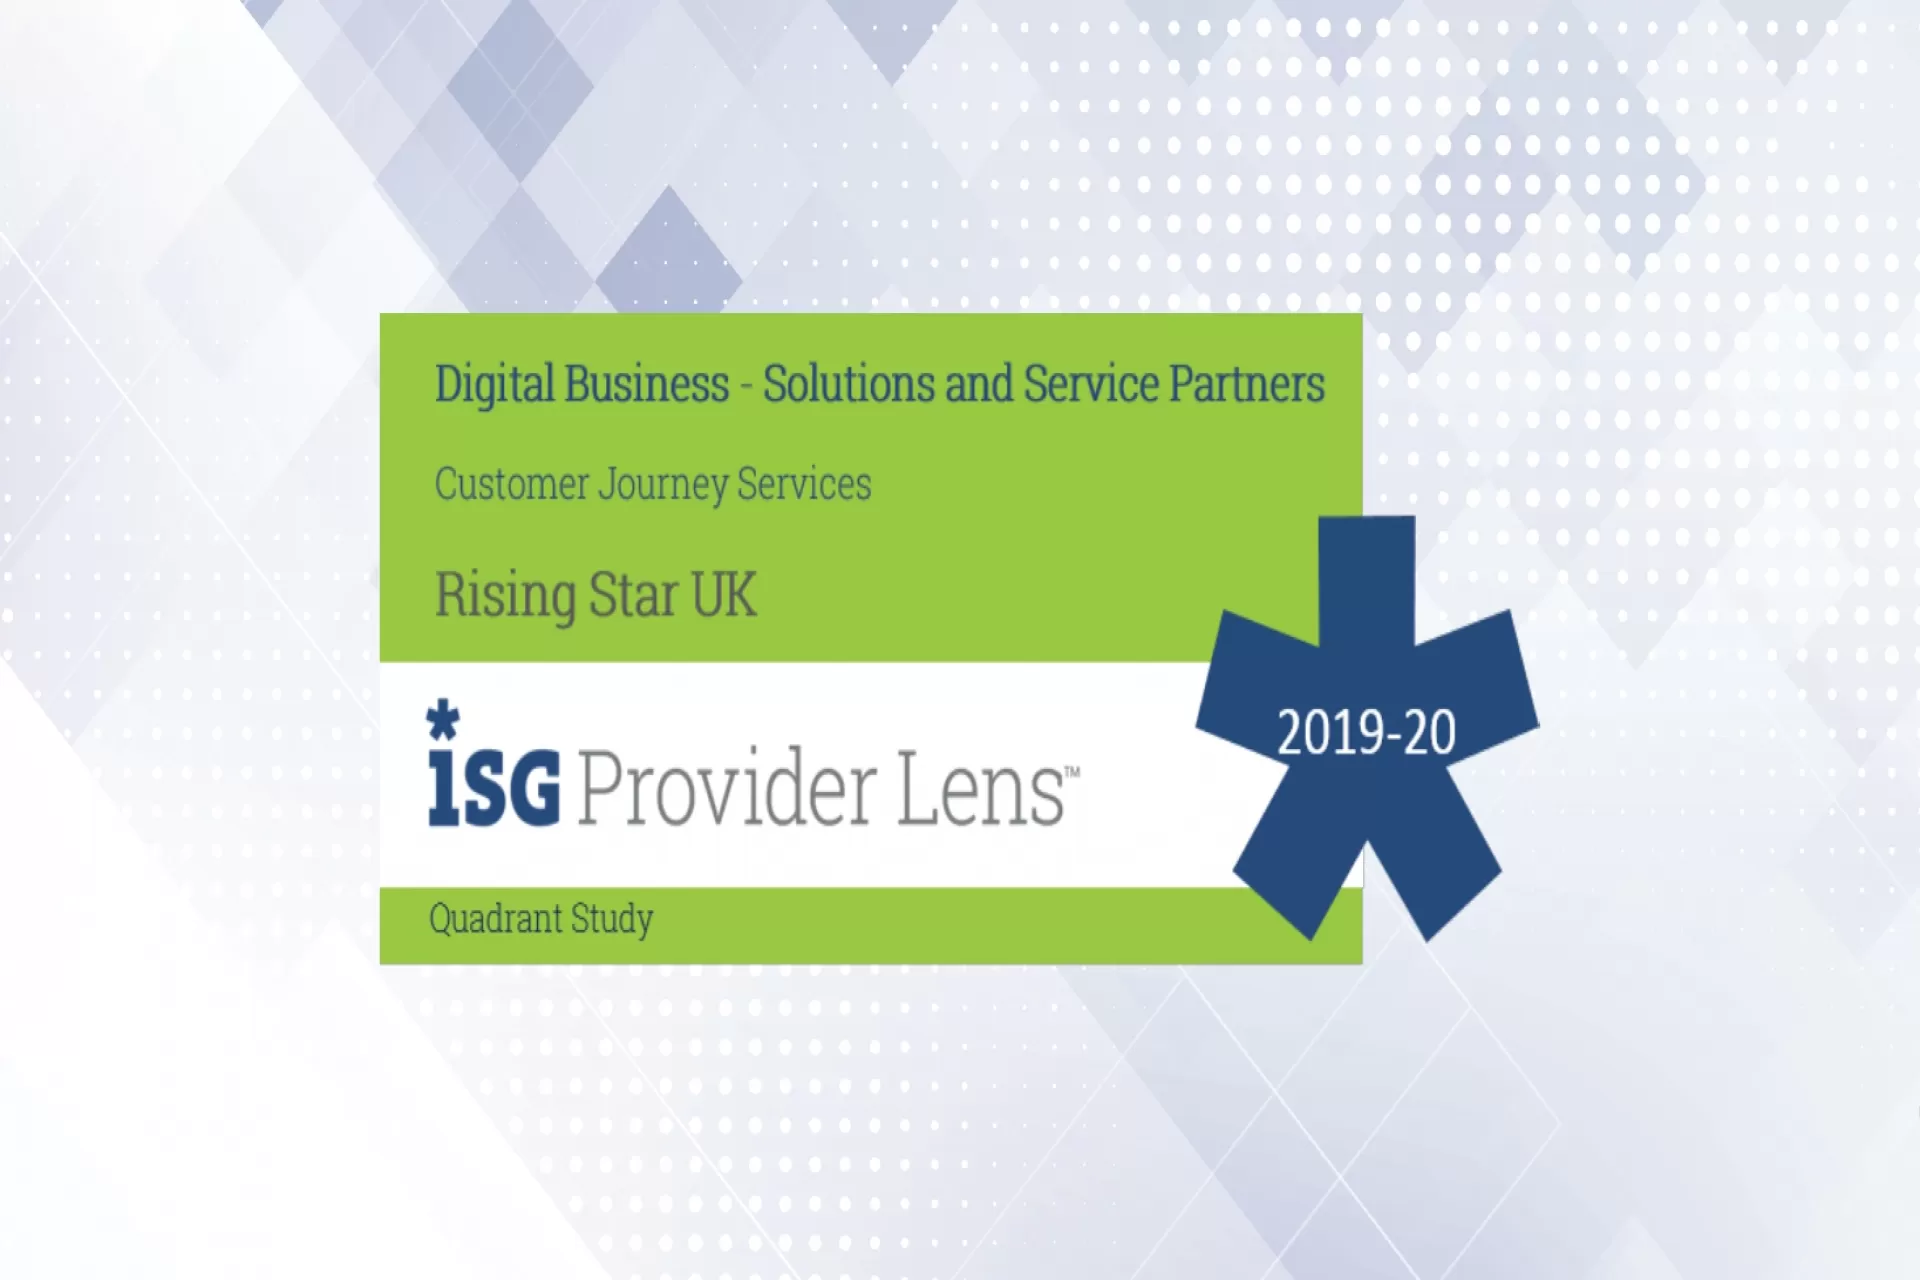 Zensar recognised in ISG Provider Lens™ Digital Business Solutions and Service Partners U.K. 2019-20